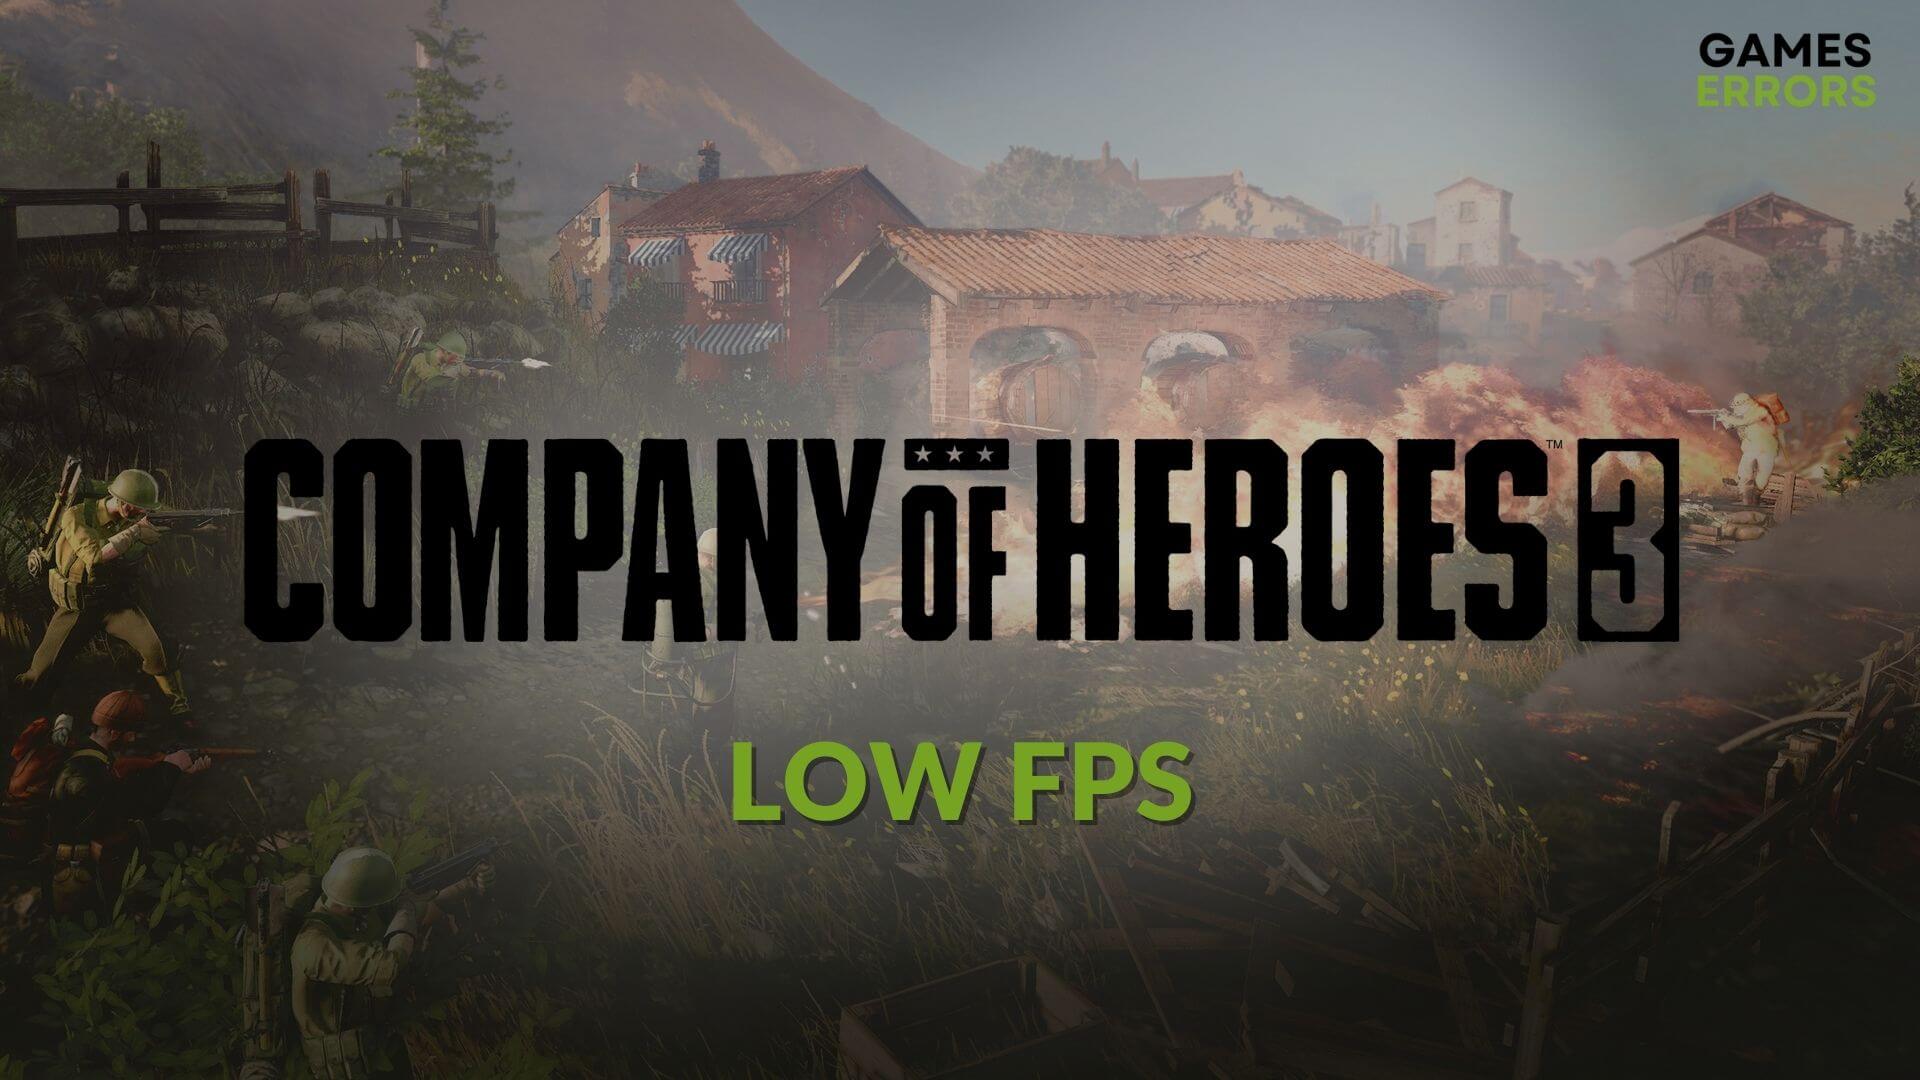 How to Fix Company of Heroes 3 Low Fps